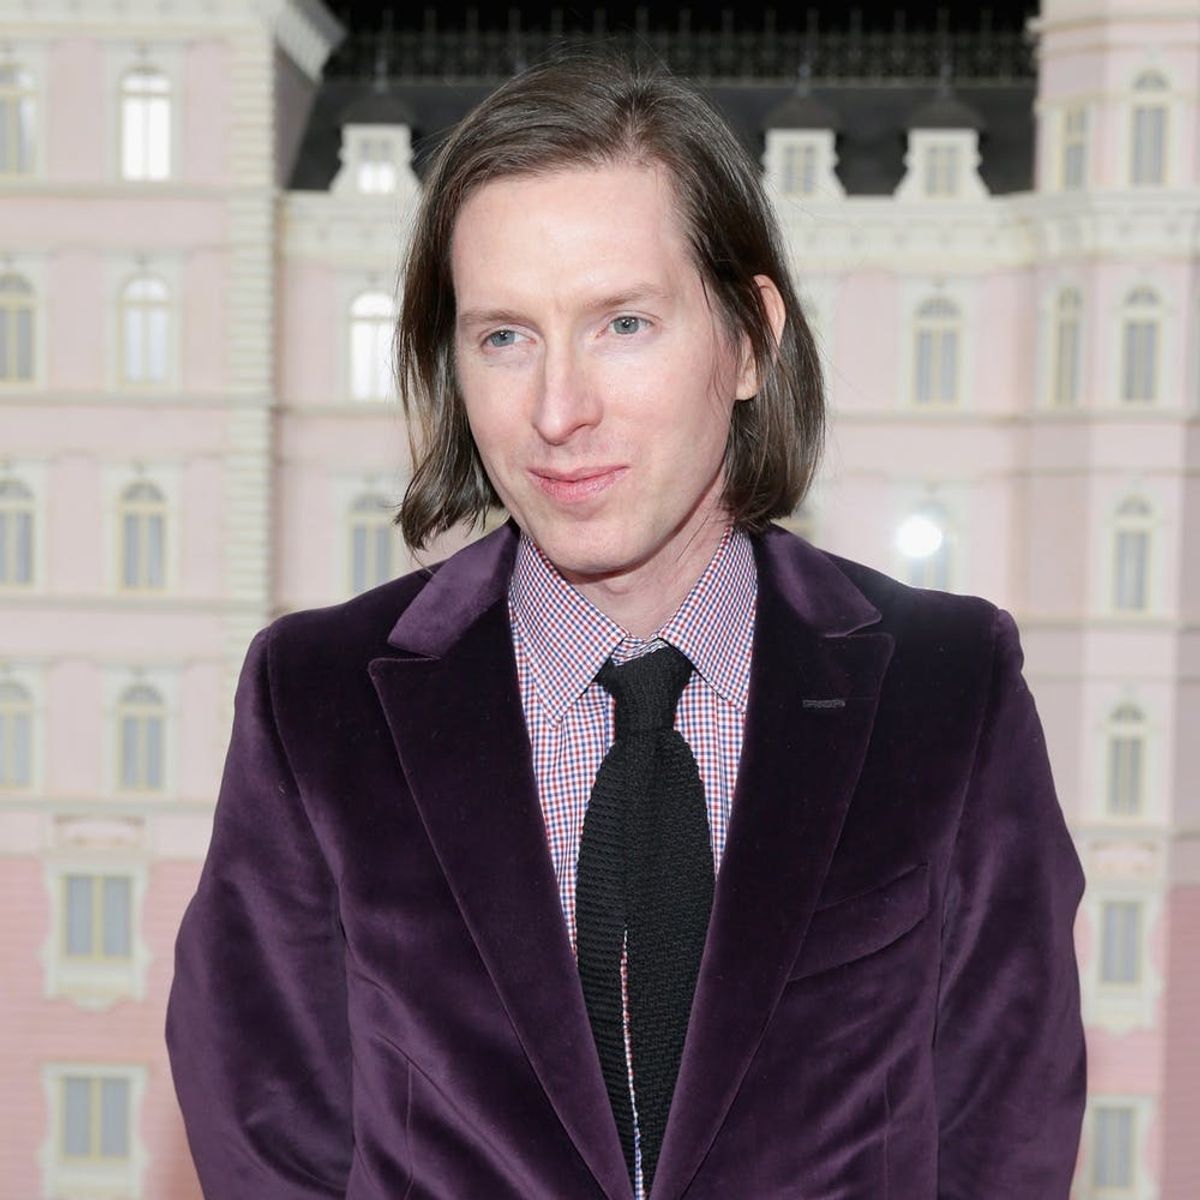 This Is What Happens When Wes Anderson Opens a Themed Cafe